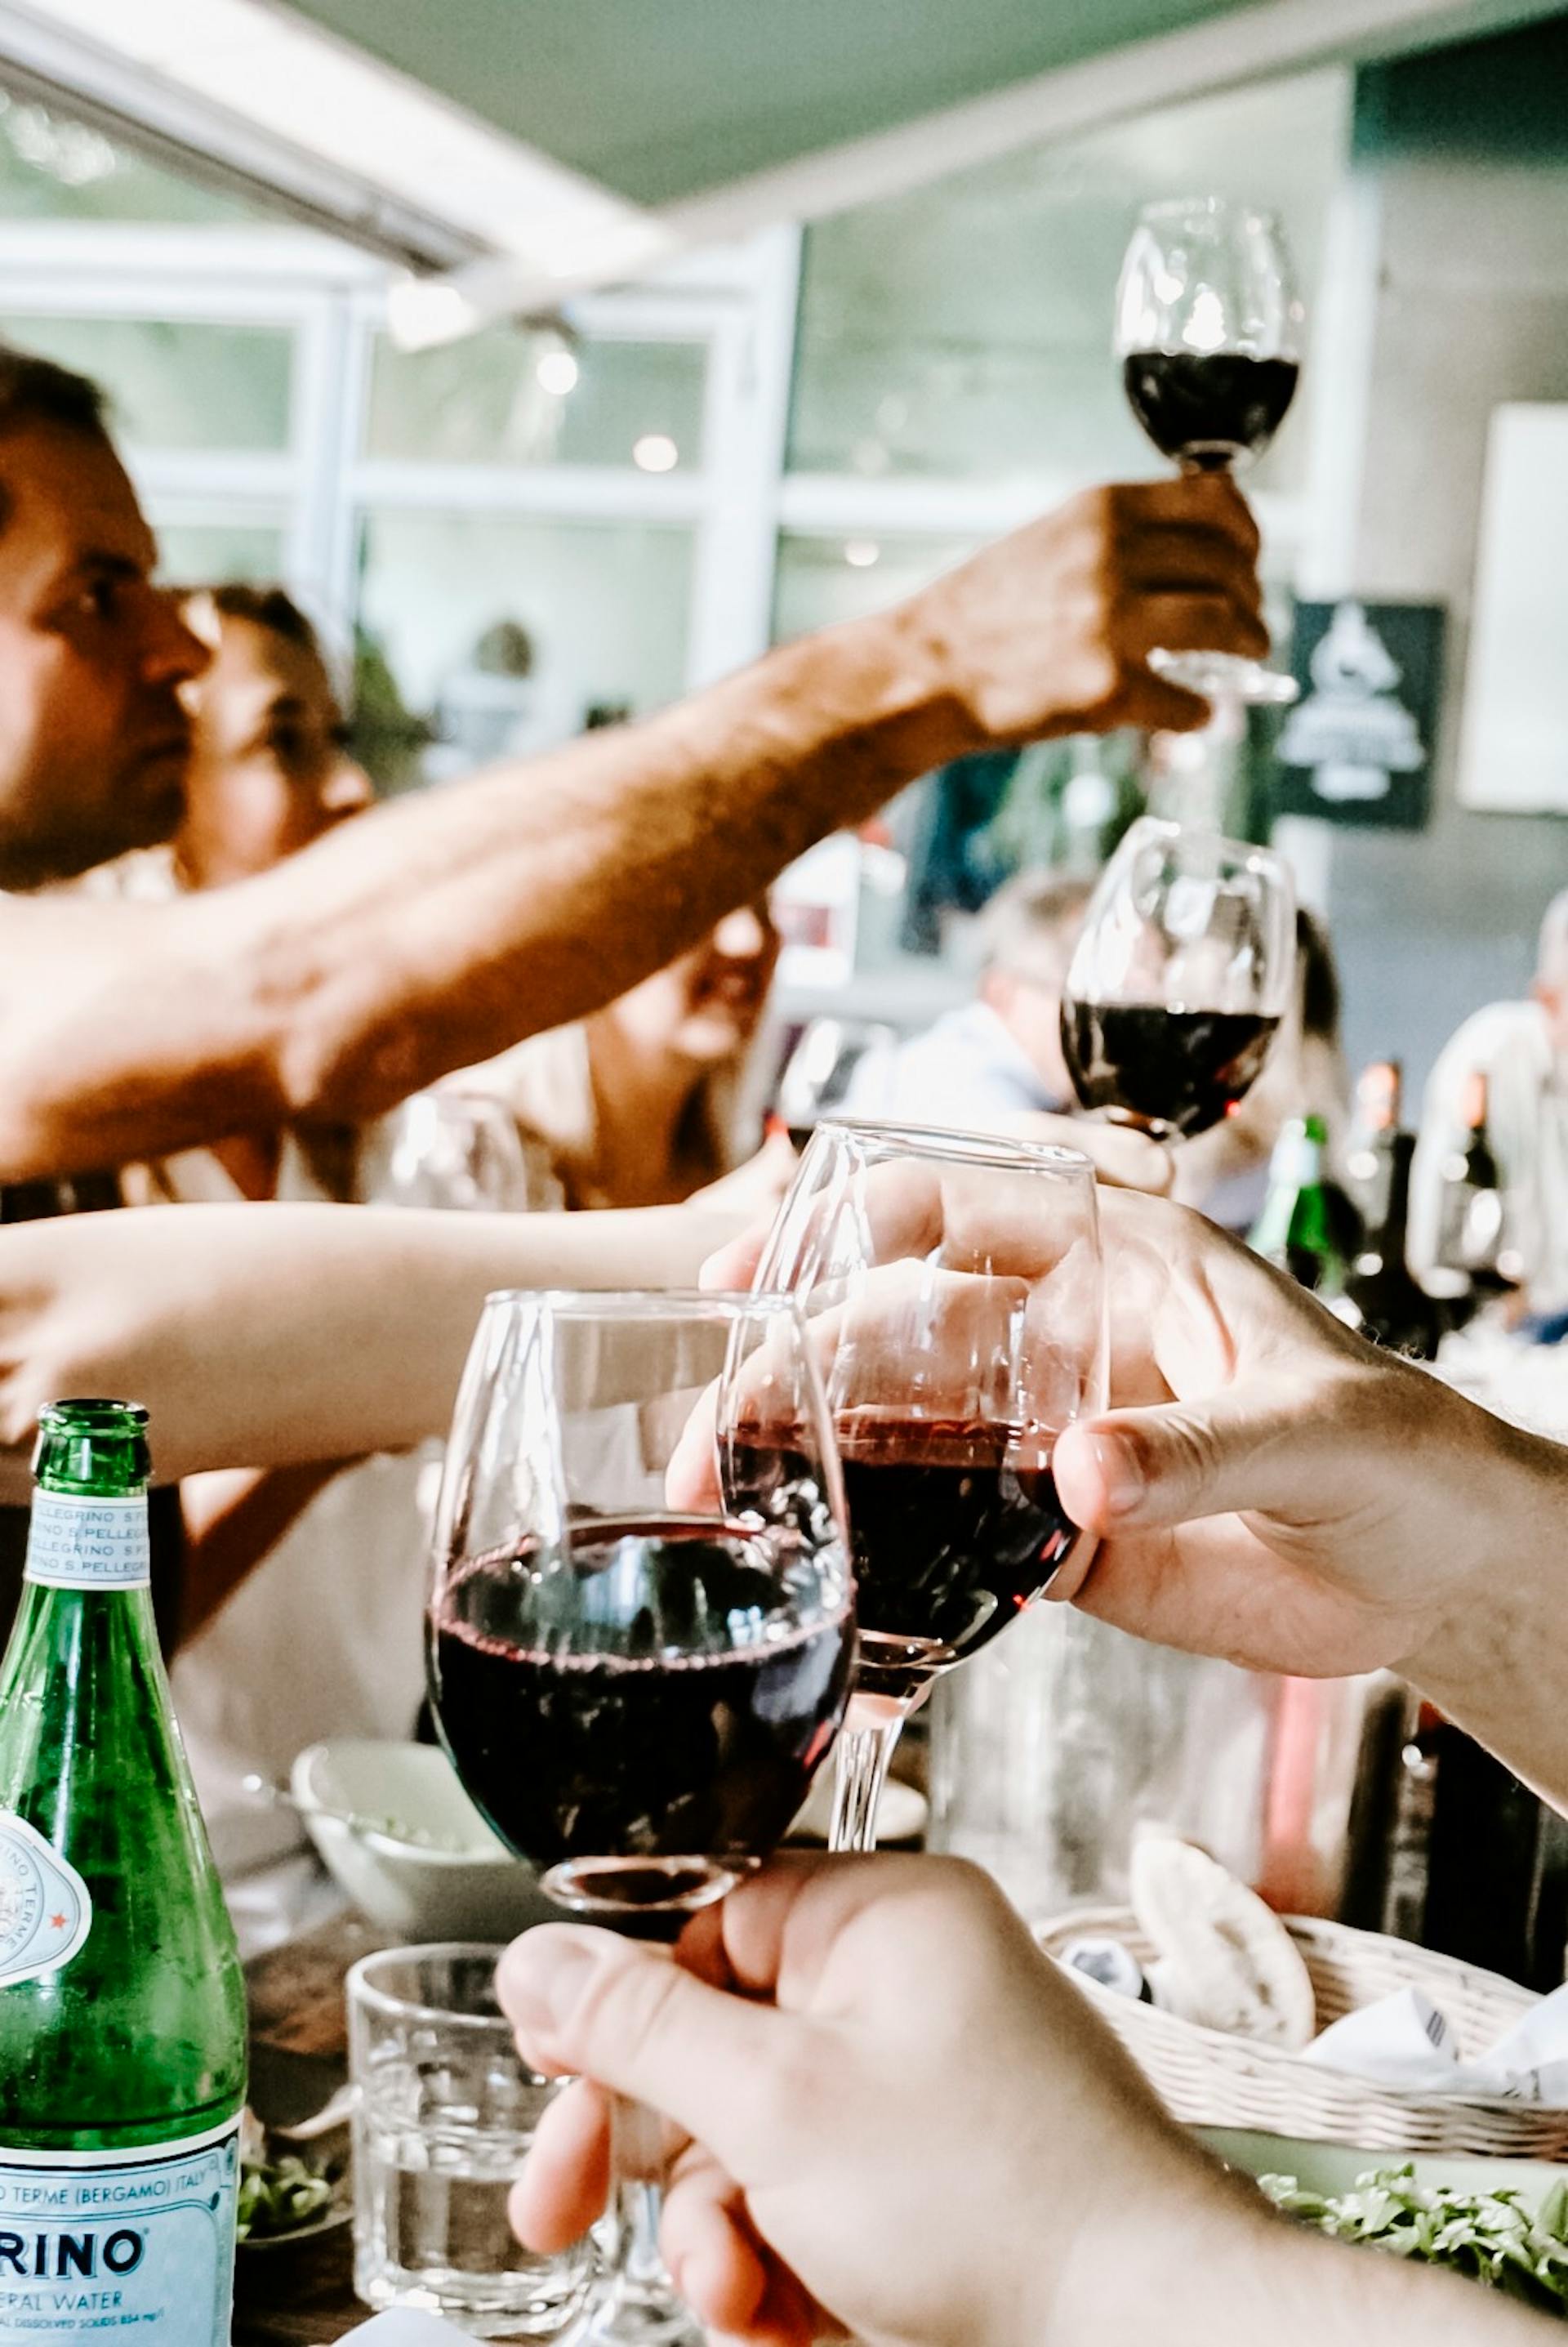 People toasting with wine | Source: Pexels